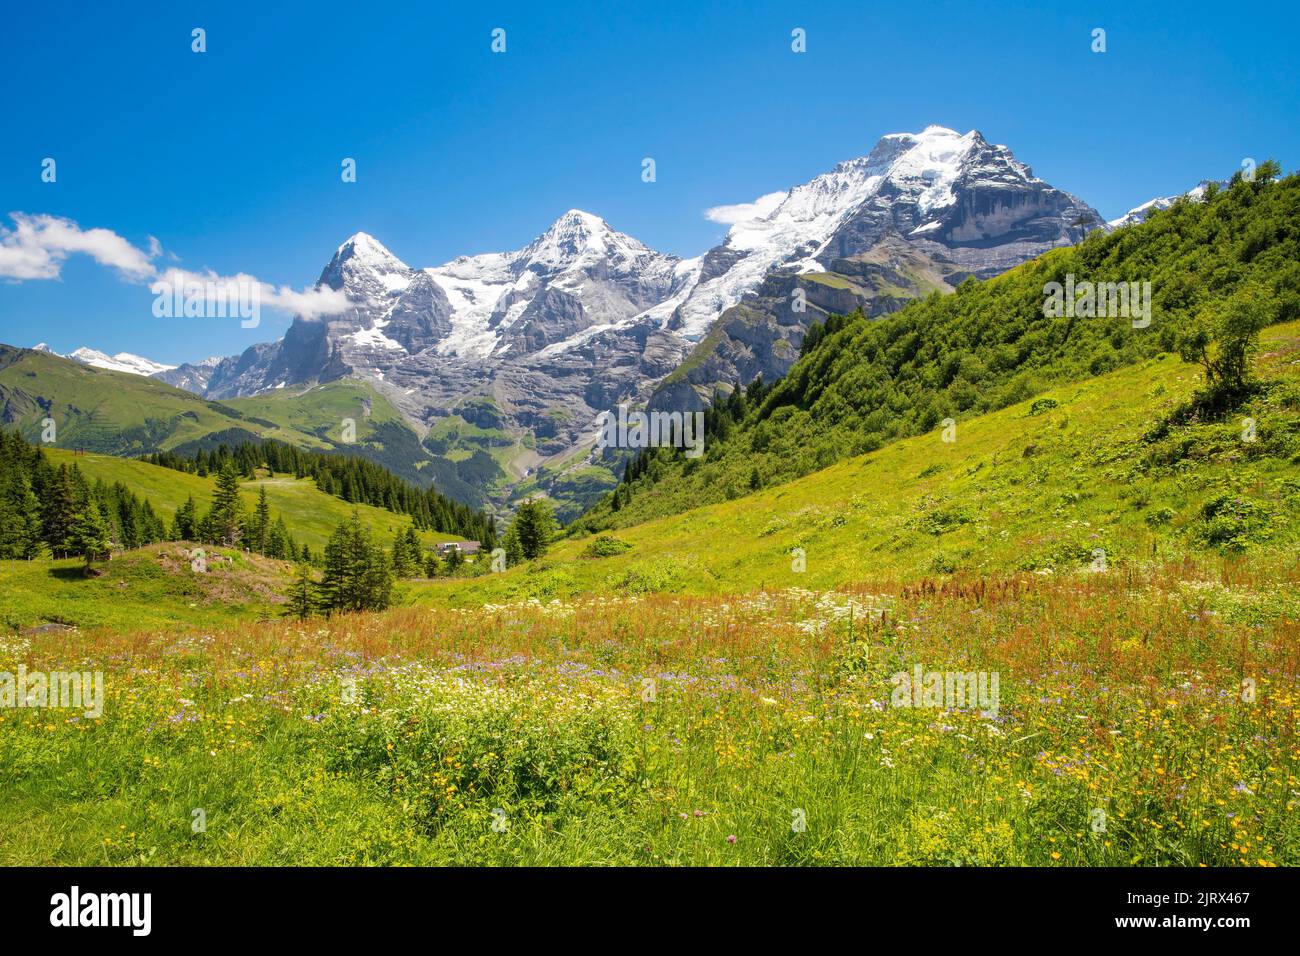 The panorma of Bernese alps with the Jungfrau, Monch and Eiger peaks. Stock Photo